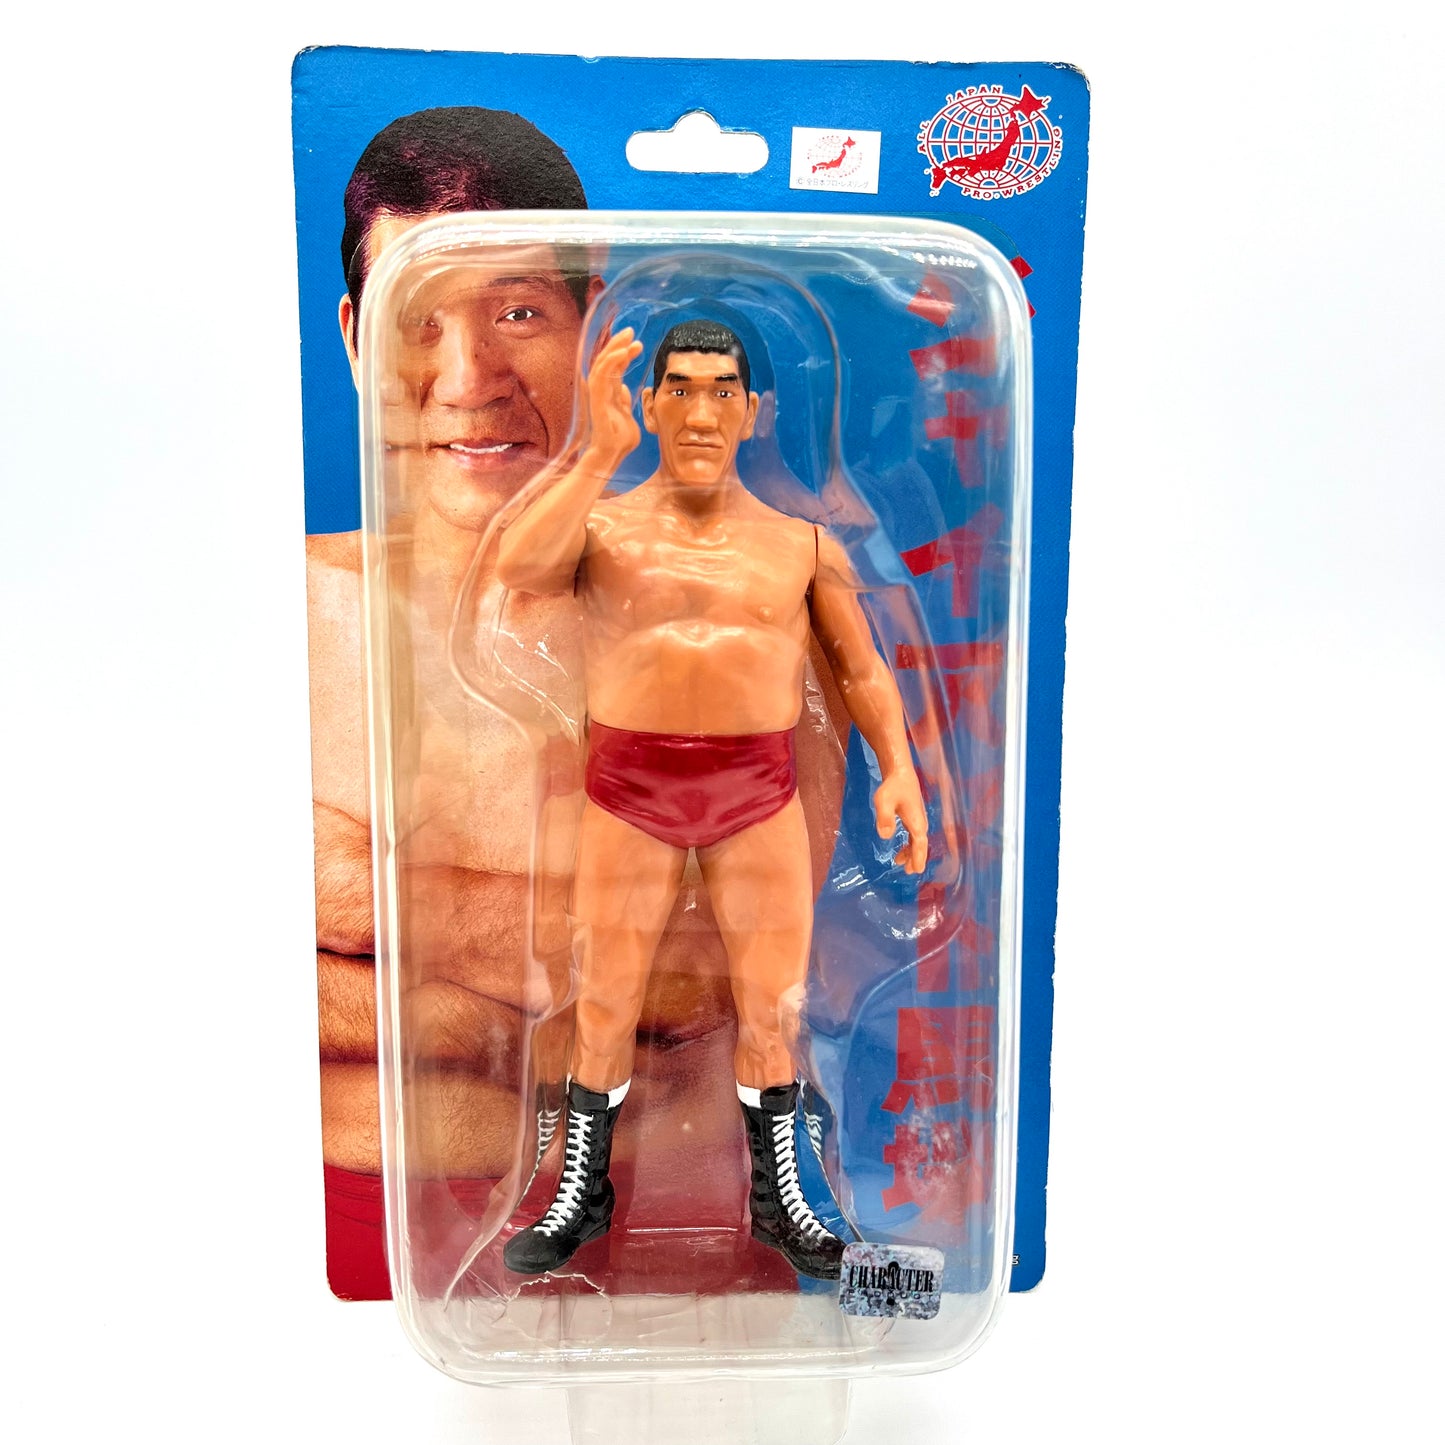 2003 AJPW CharaPro Deluxe Giant Baba [In High Chop Pose]